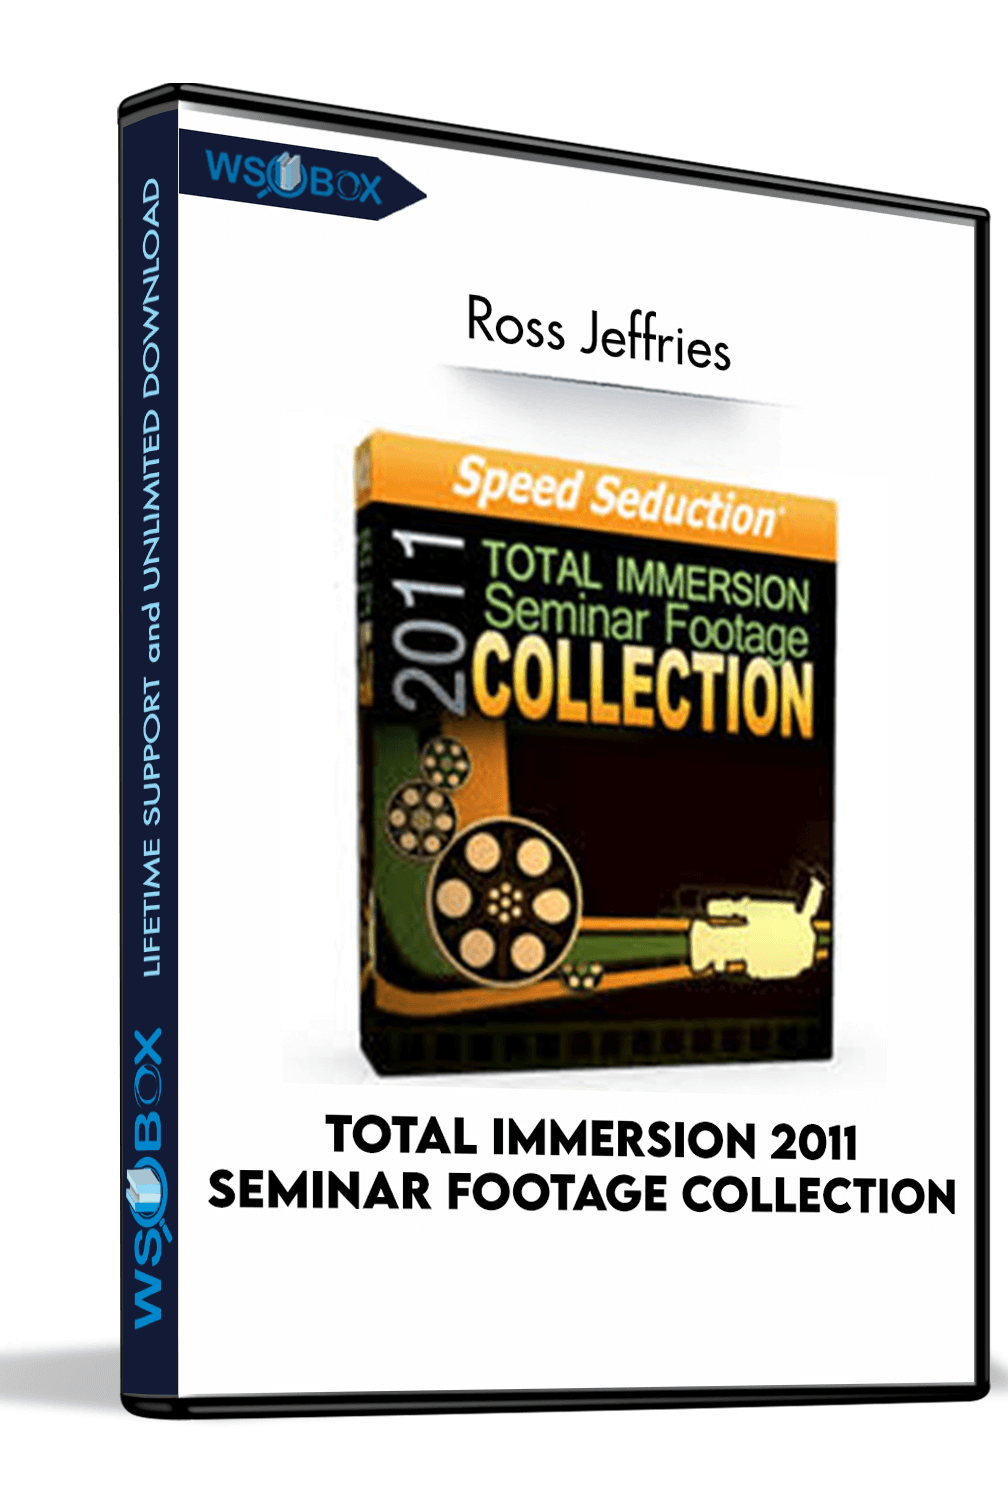 total-immersion-2011-seminar-footage-collection-ross-jeffries